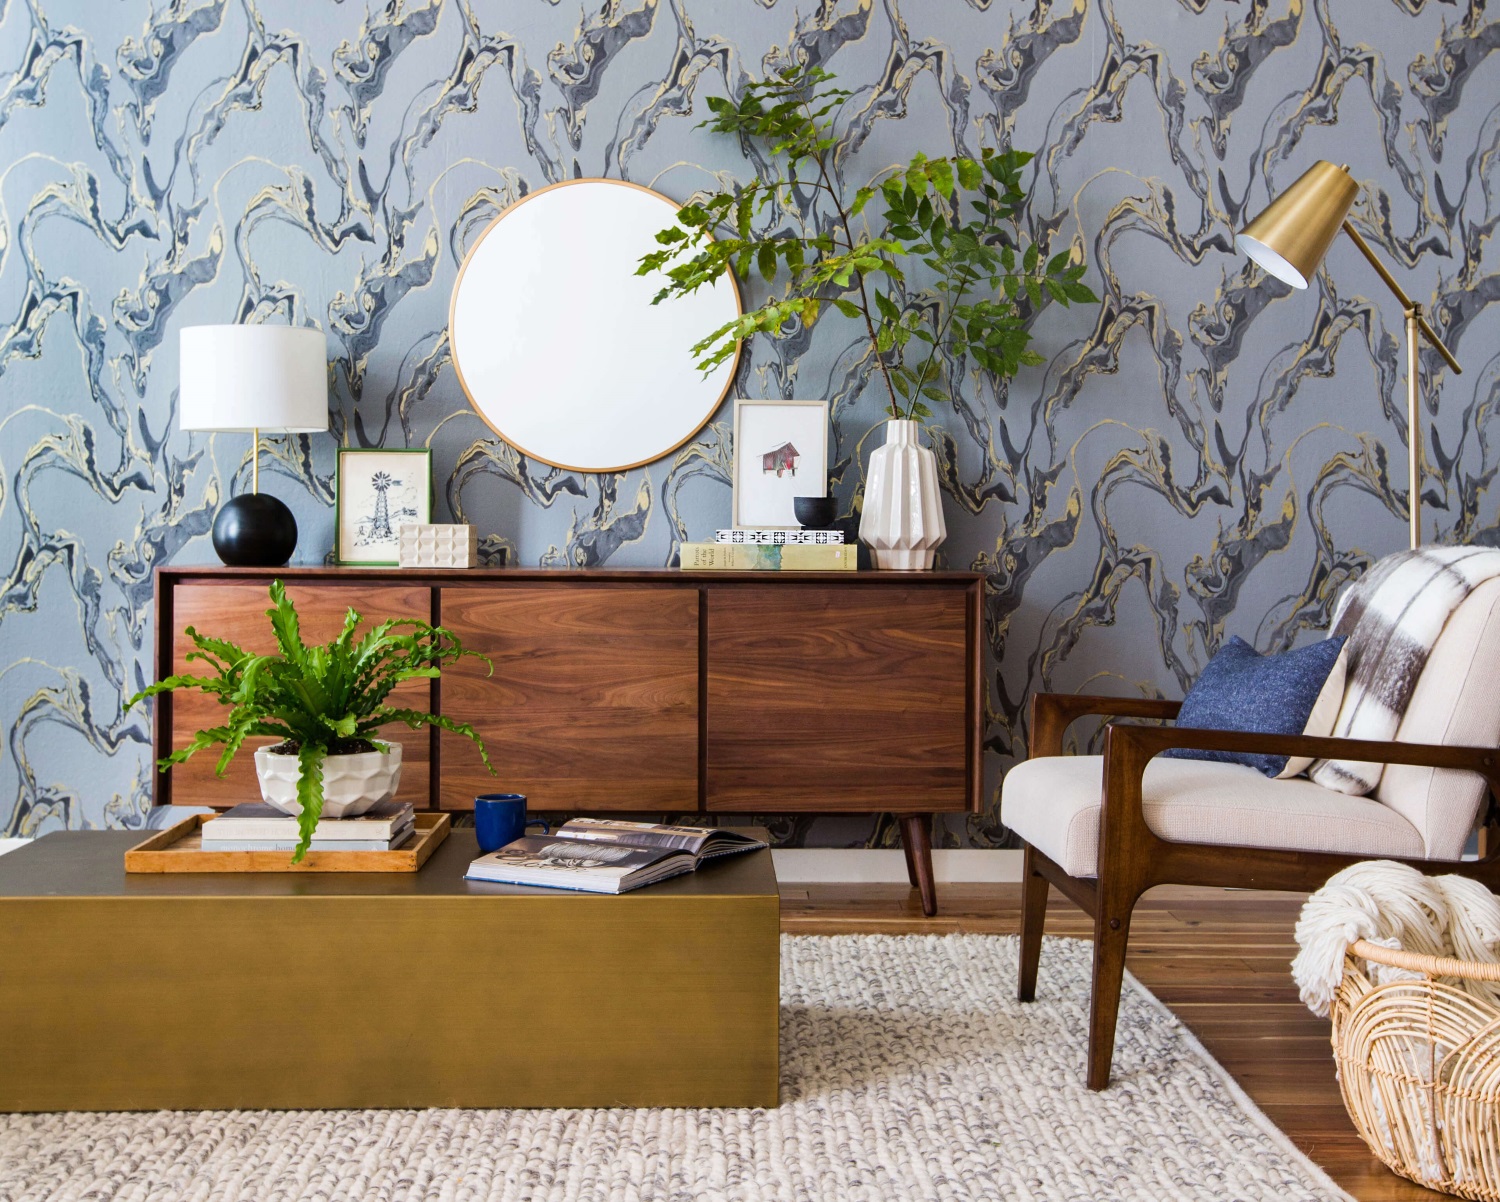 Nice style in a small mid-century room